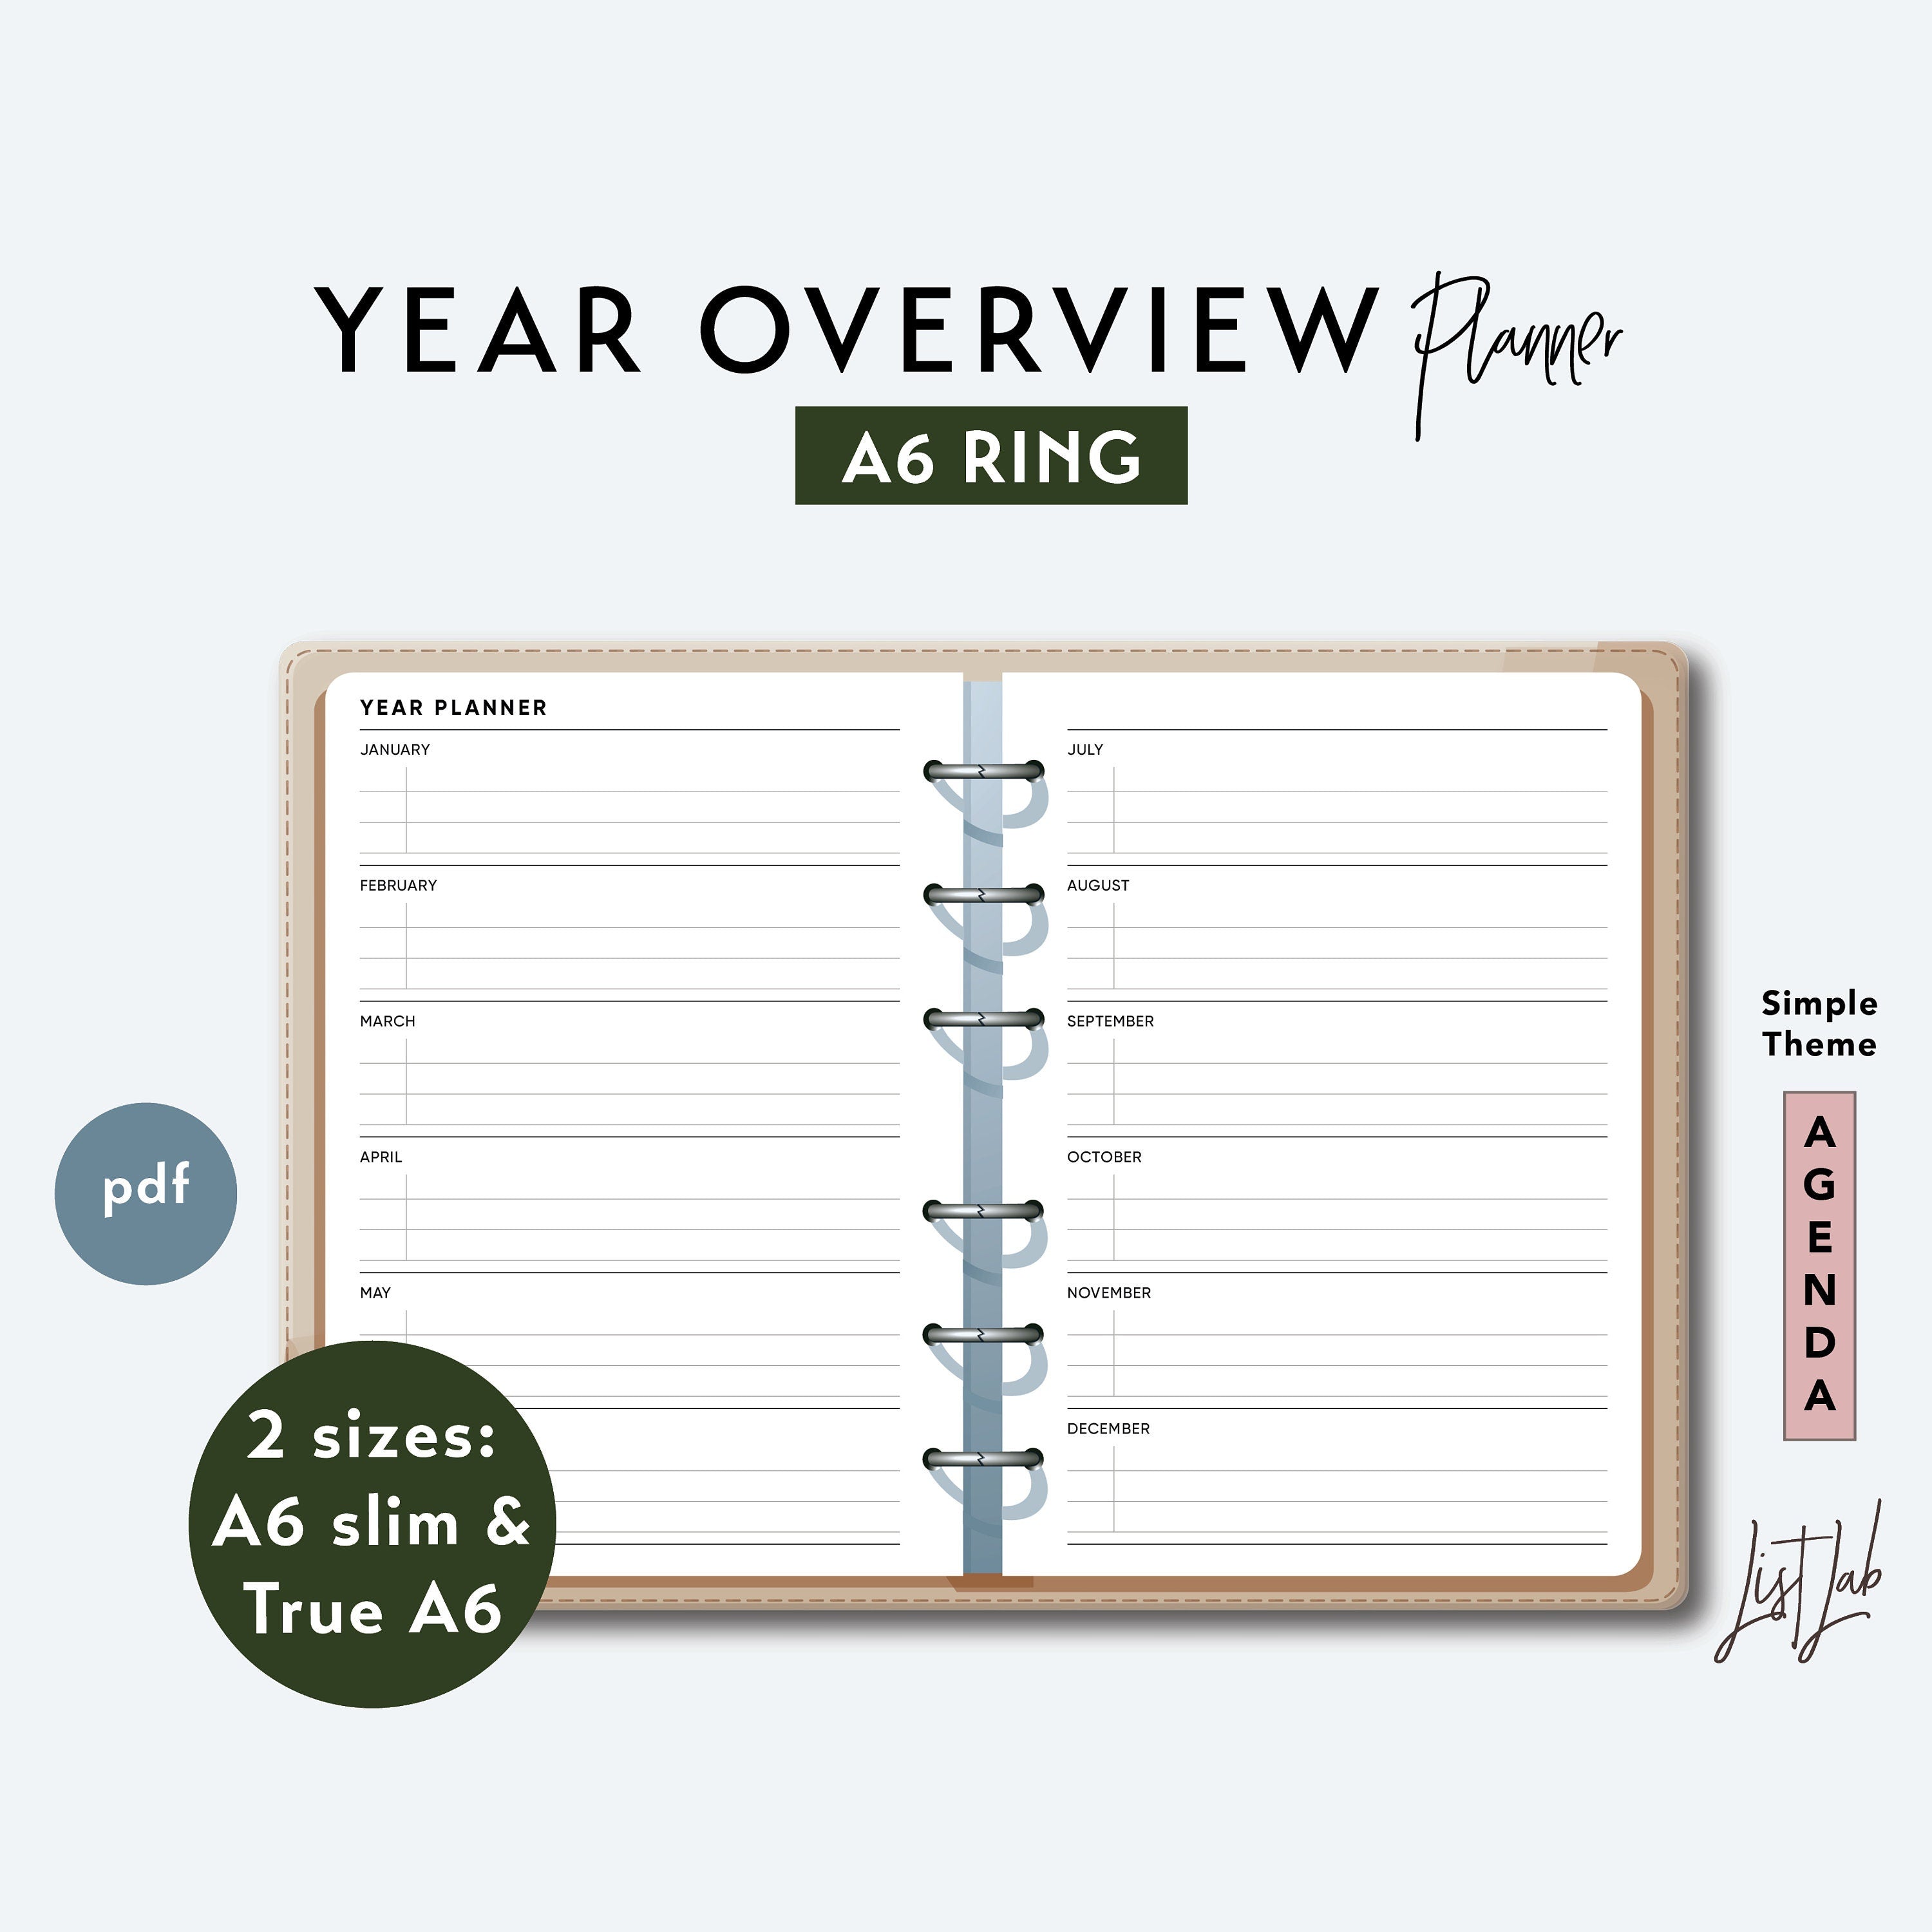 A6 Ring YEAR OVERVIEW PLANNER Printable Set – ListLab